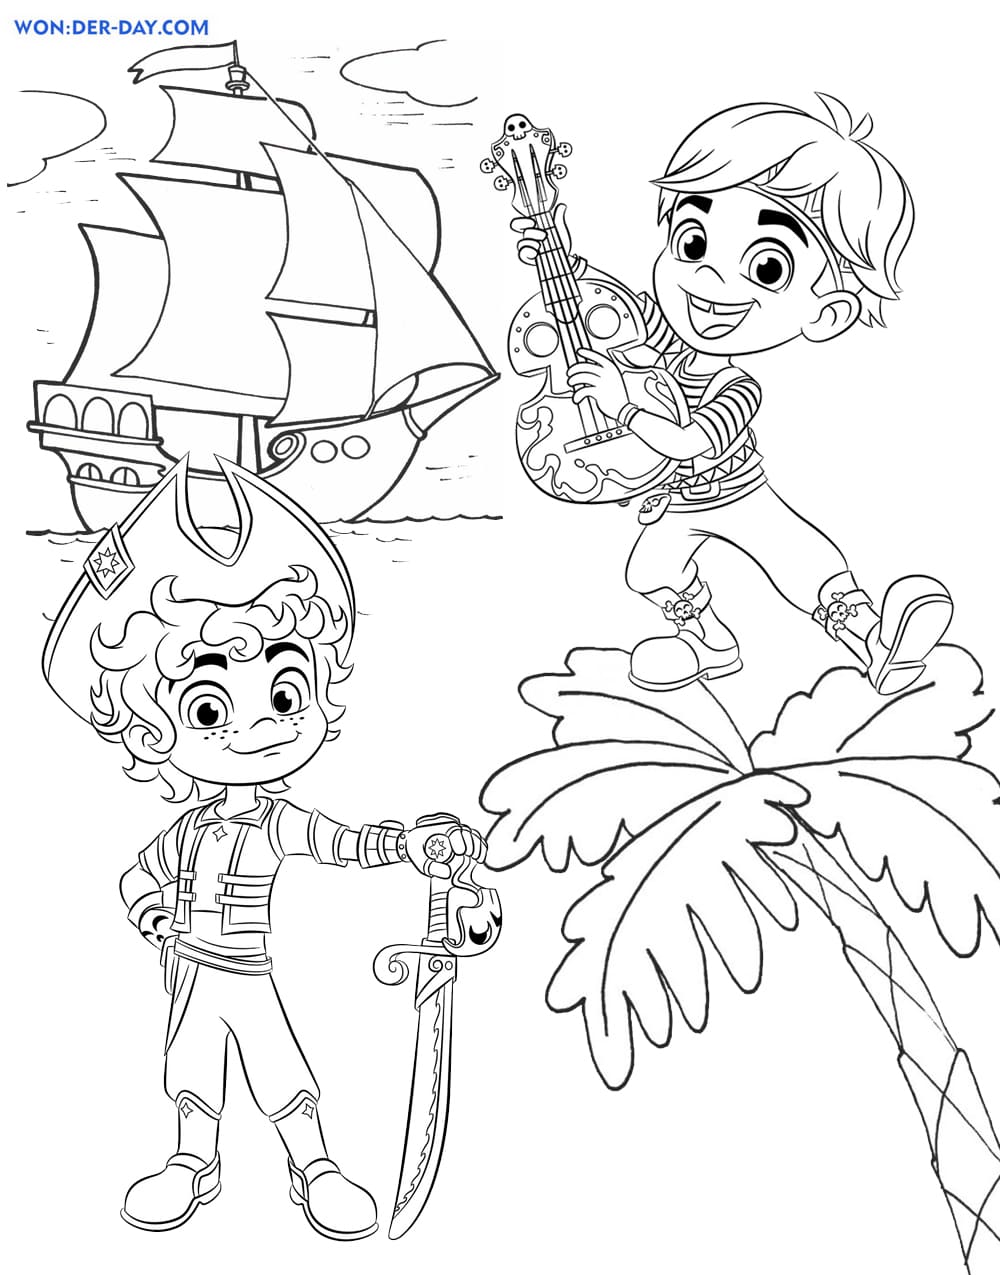 Santiago Of The Seas Coloring Pages | WONDER DAY — Coloring pages for  children and adults